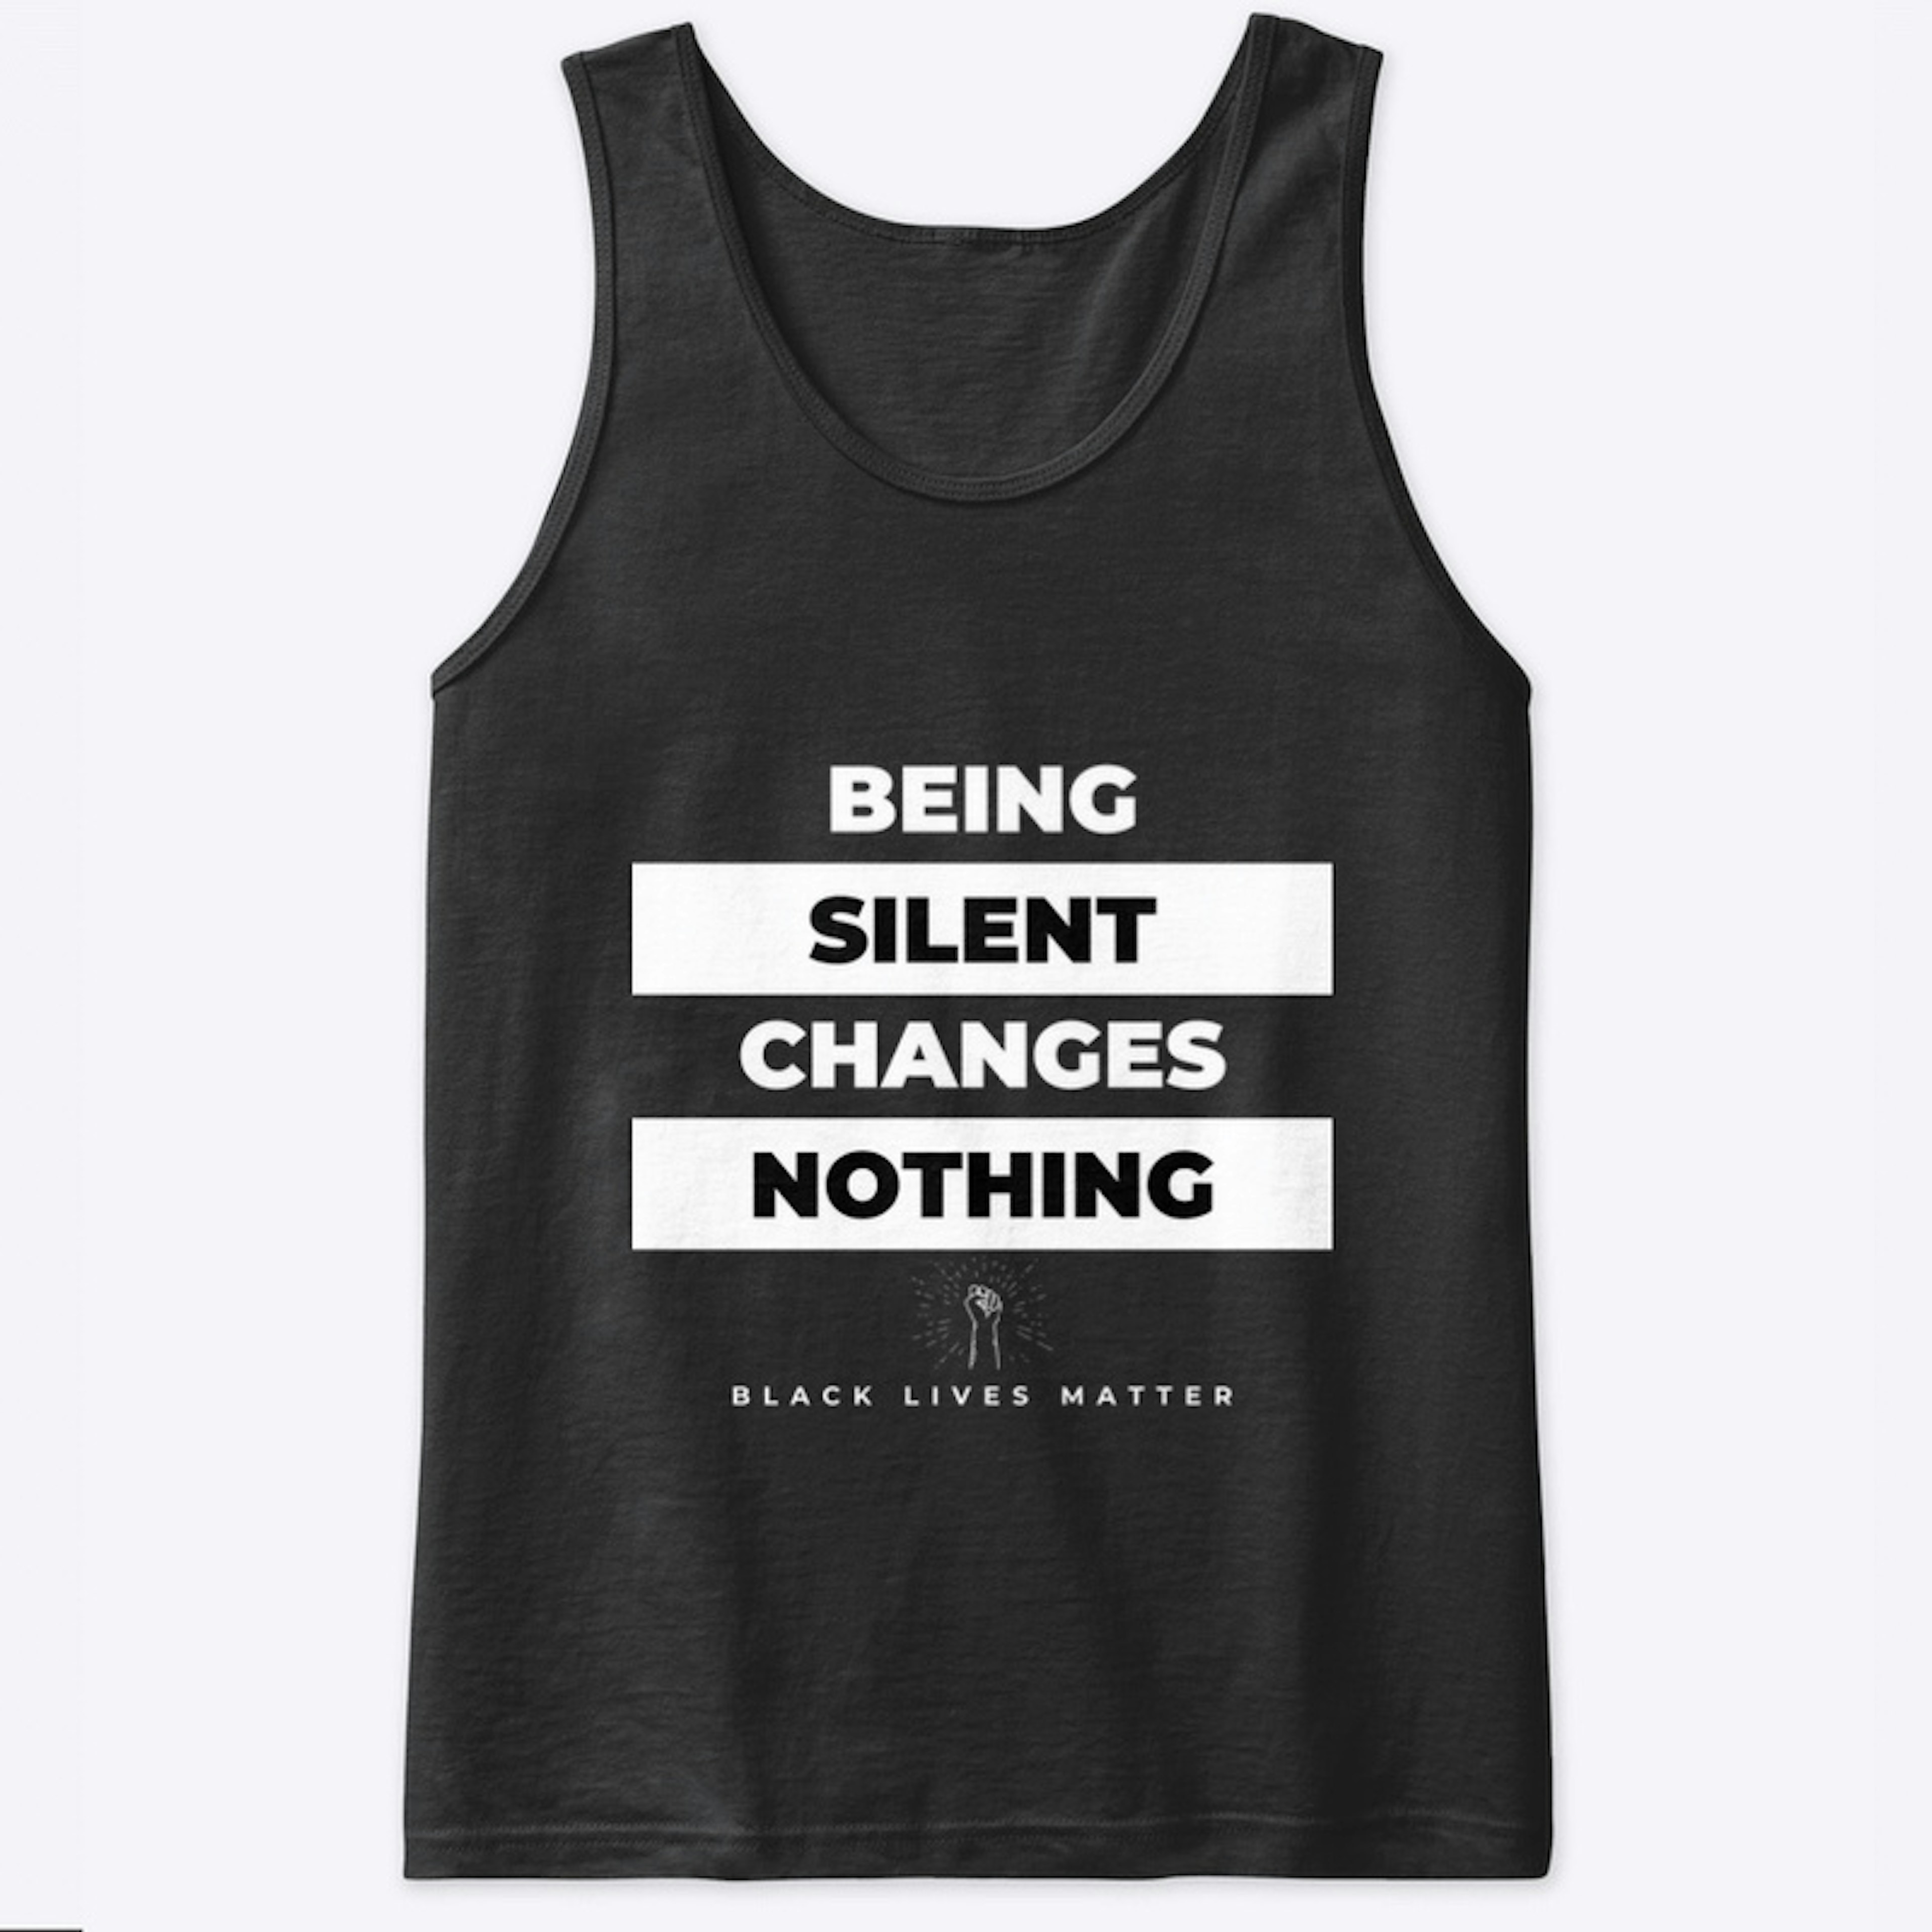 Being Silent Changes Nothing